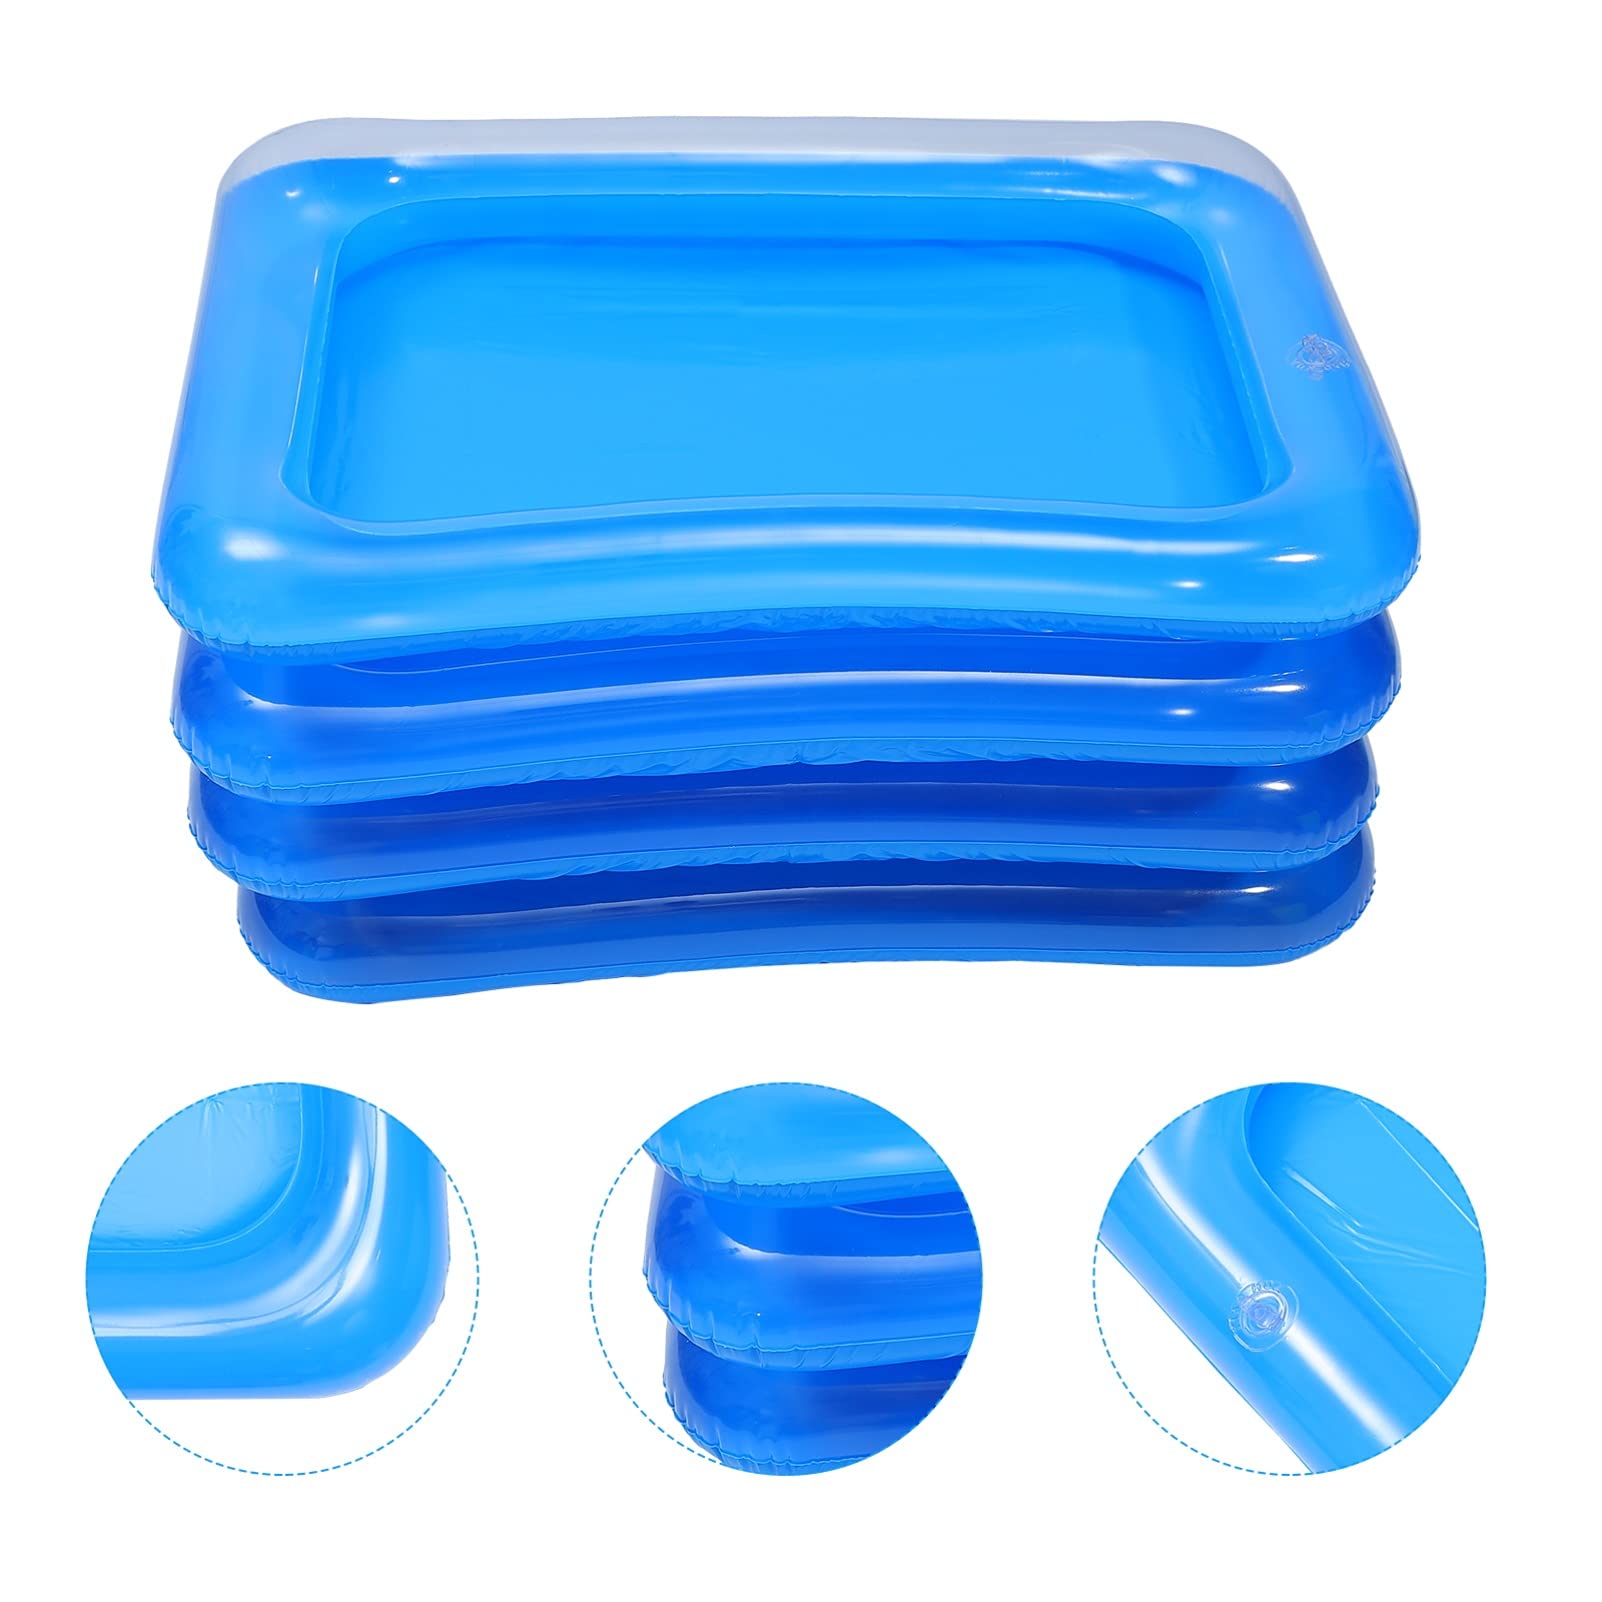 Hemoton 4pcs Inflatable Pool Serving Bar Salad Ice Tray Food Drink Containers Buffet Cooler for Pool Use Bar Party Accessories Inflatable Cooler 60x45cm